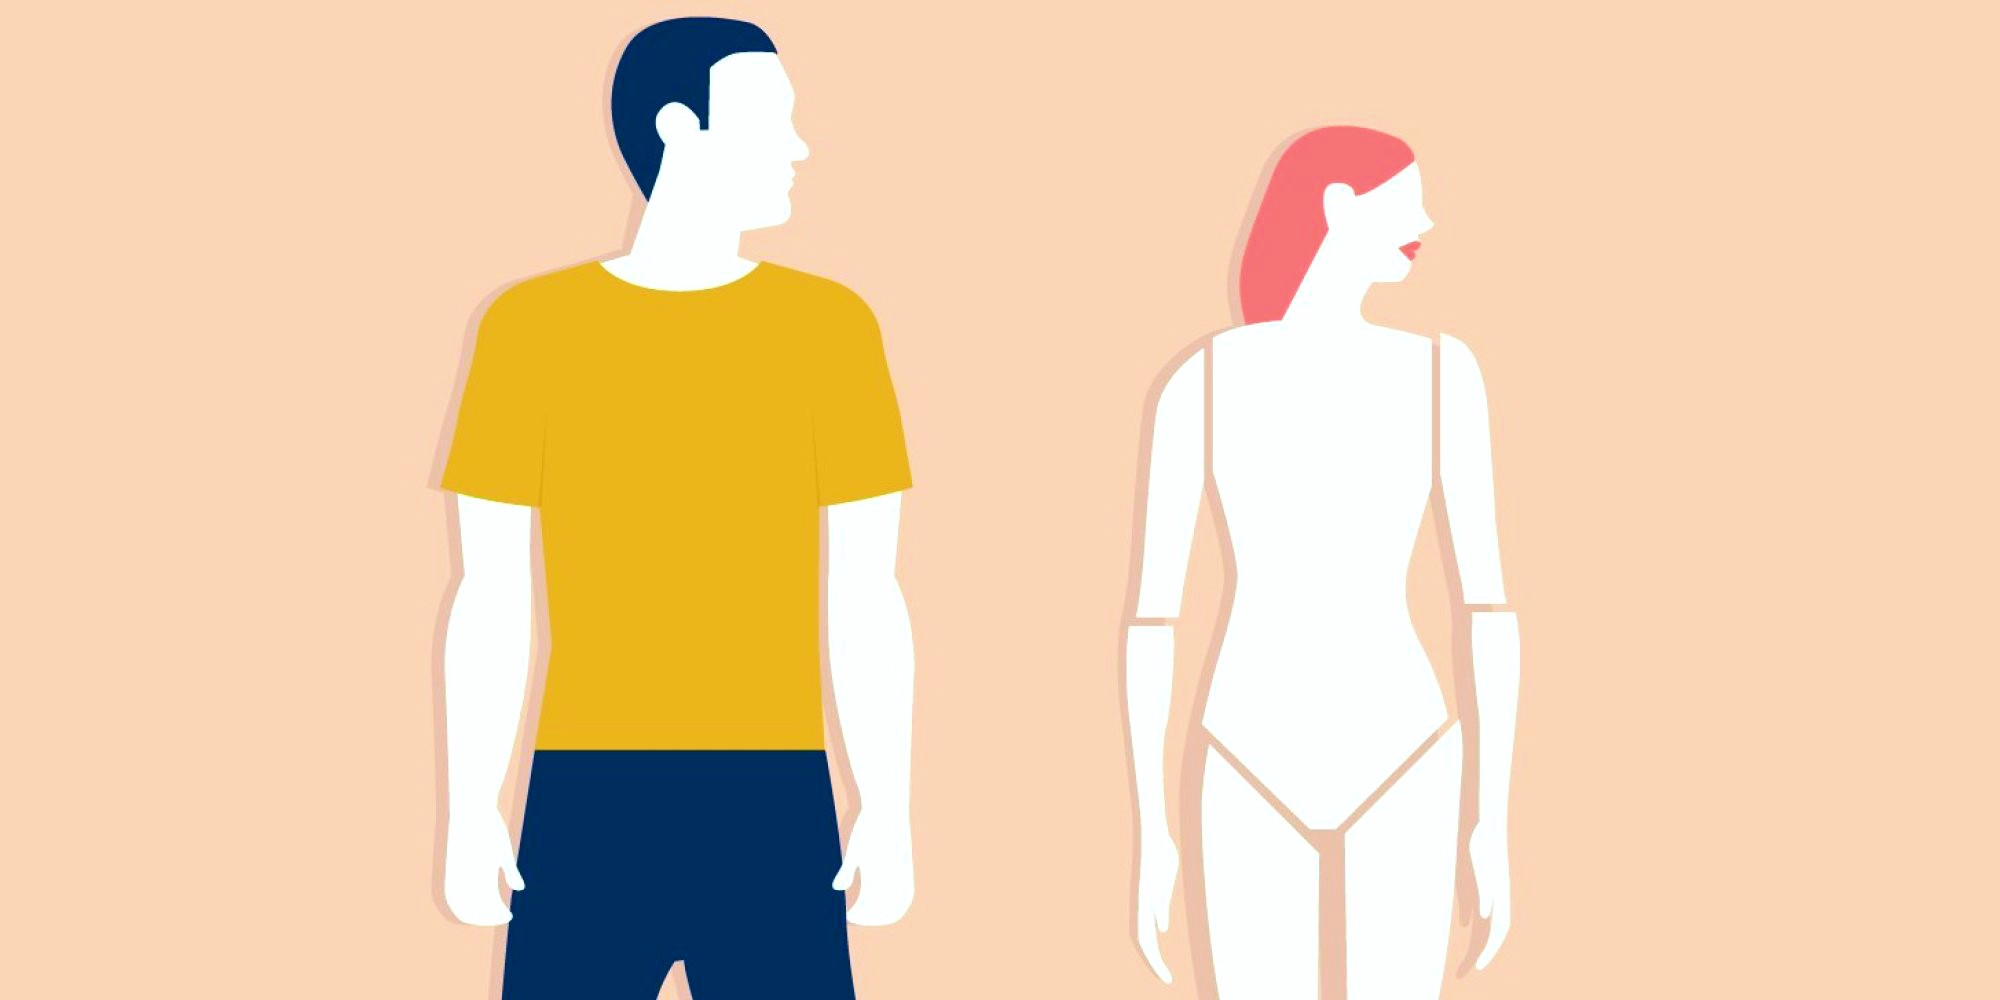 Image features a masculine presenting person wearing a yellow shirt and blue shorts standing next to a feminine presenting person meant to be a woman wearing no clothing with doll-like joints on her hips and elbows.